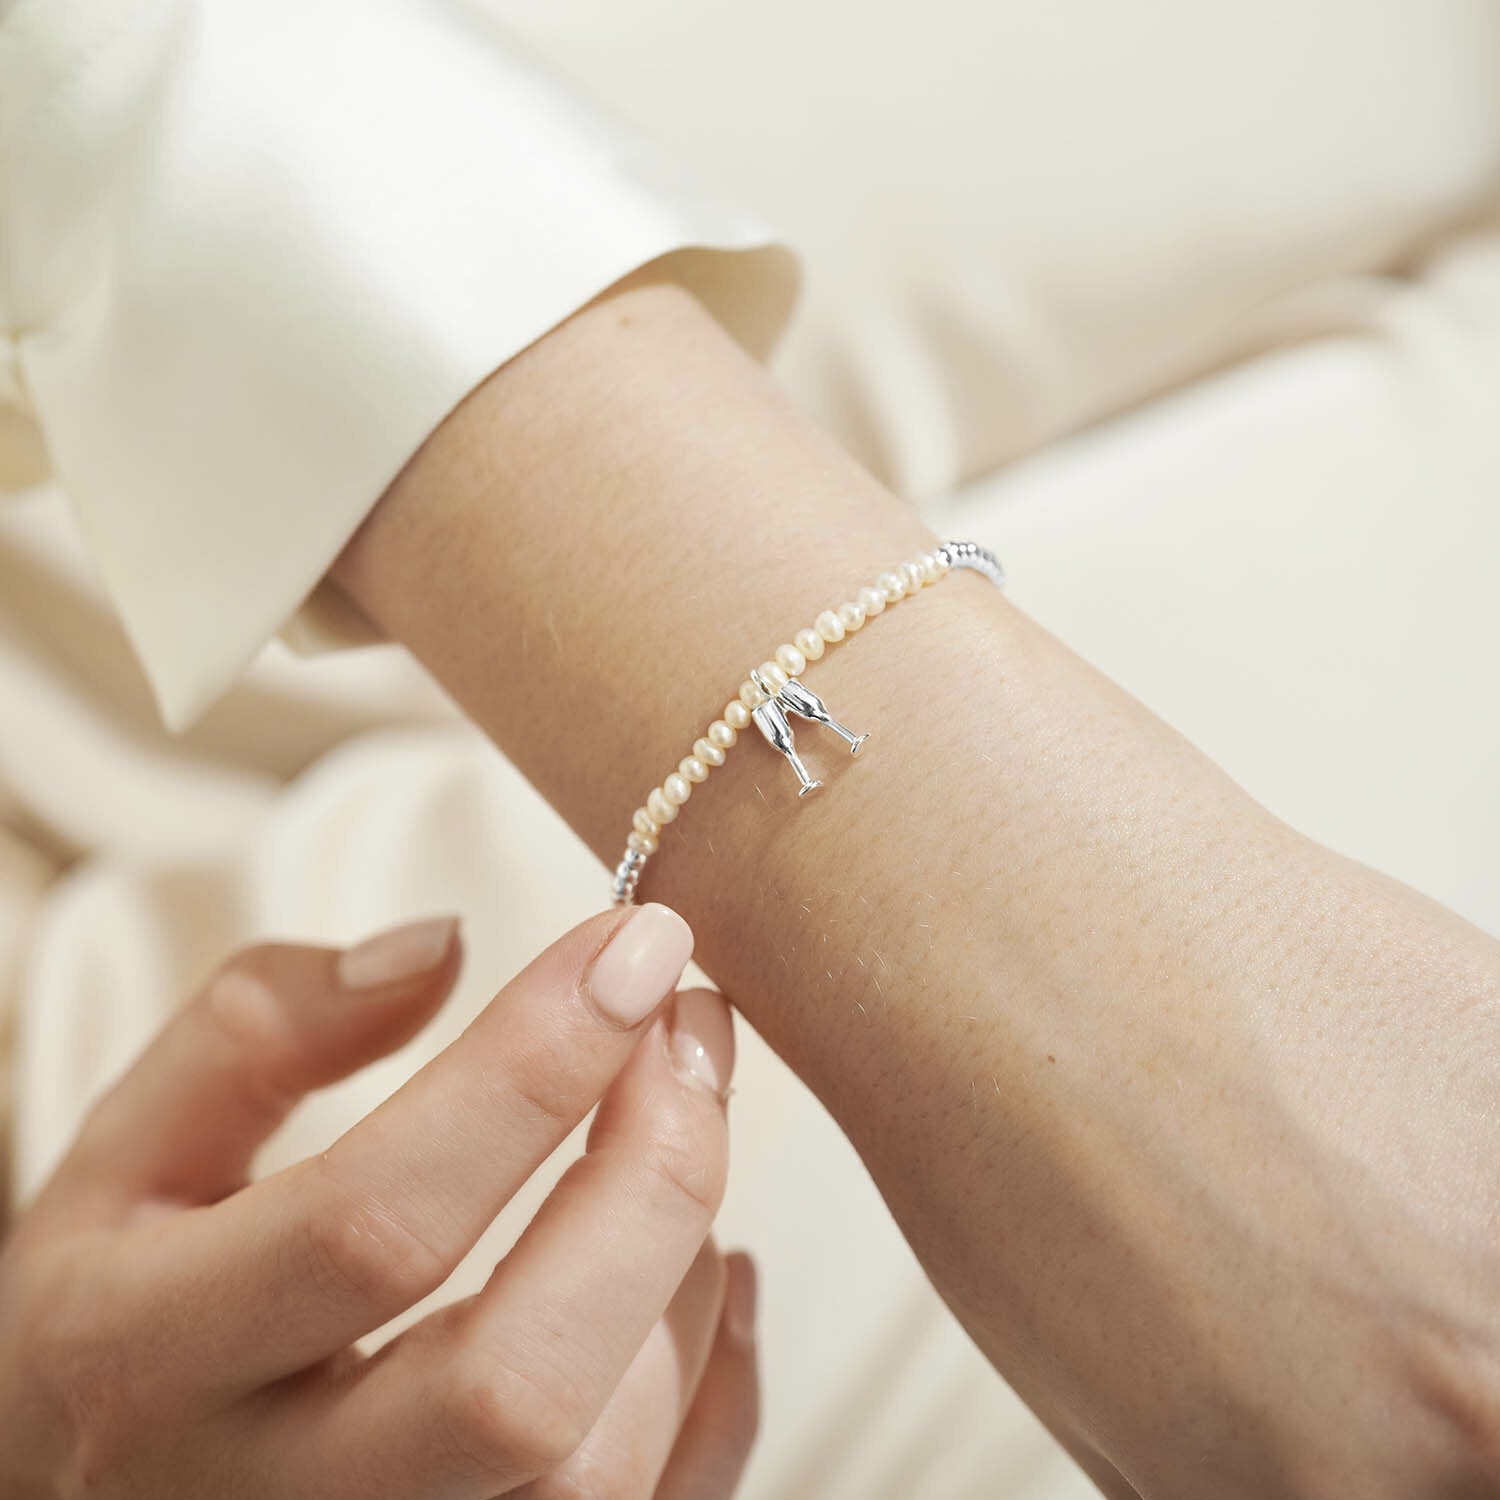 Bridal Pearl Bracelet - Hooray For The Big Day - Joma Jewellery